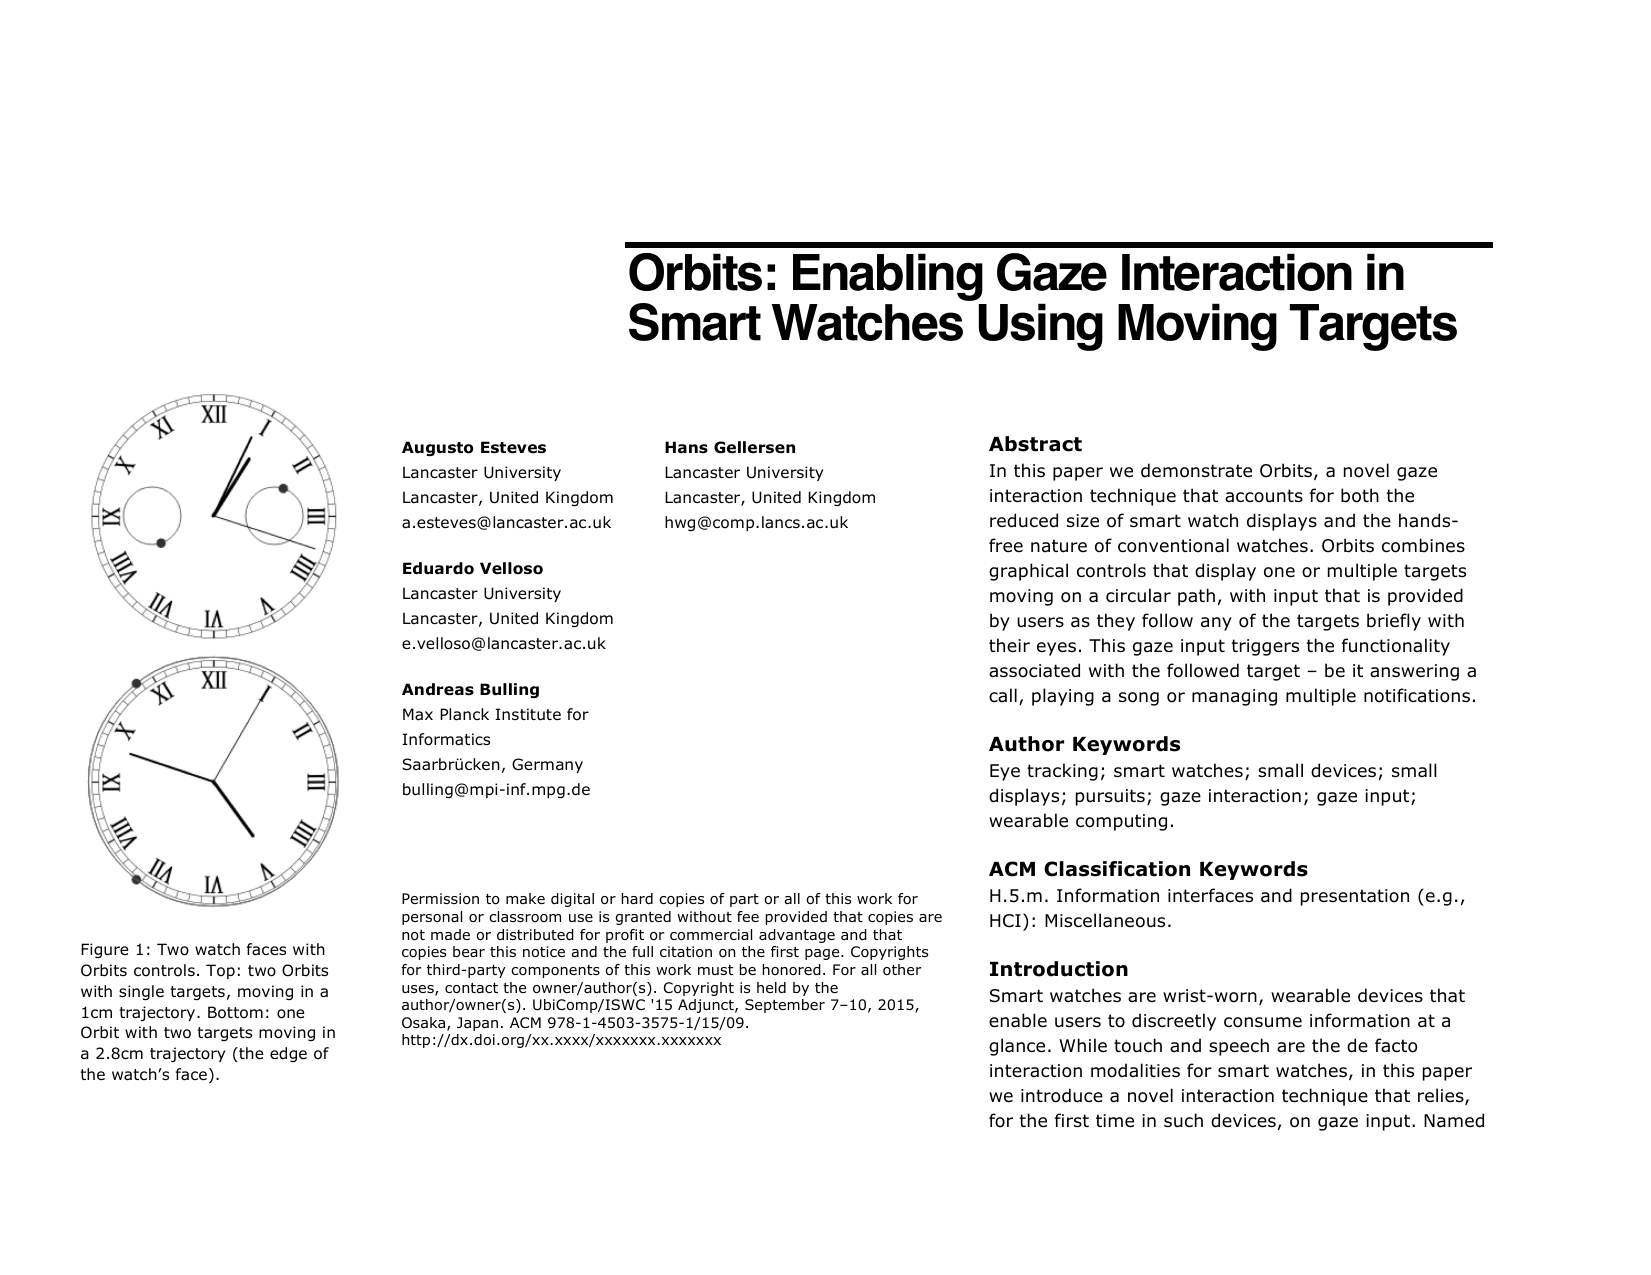 Orbits: Enabling Gaze Interaction in Smart Watches using Moving Targets